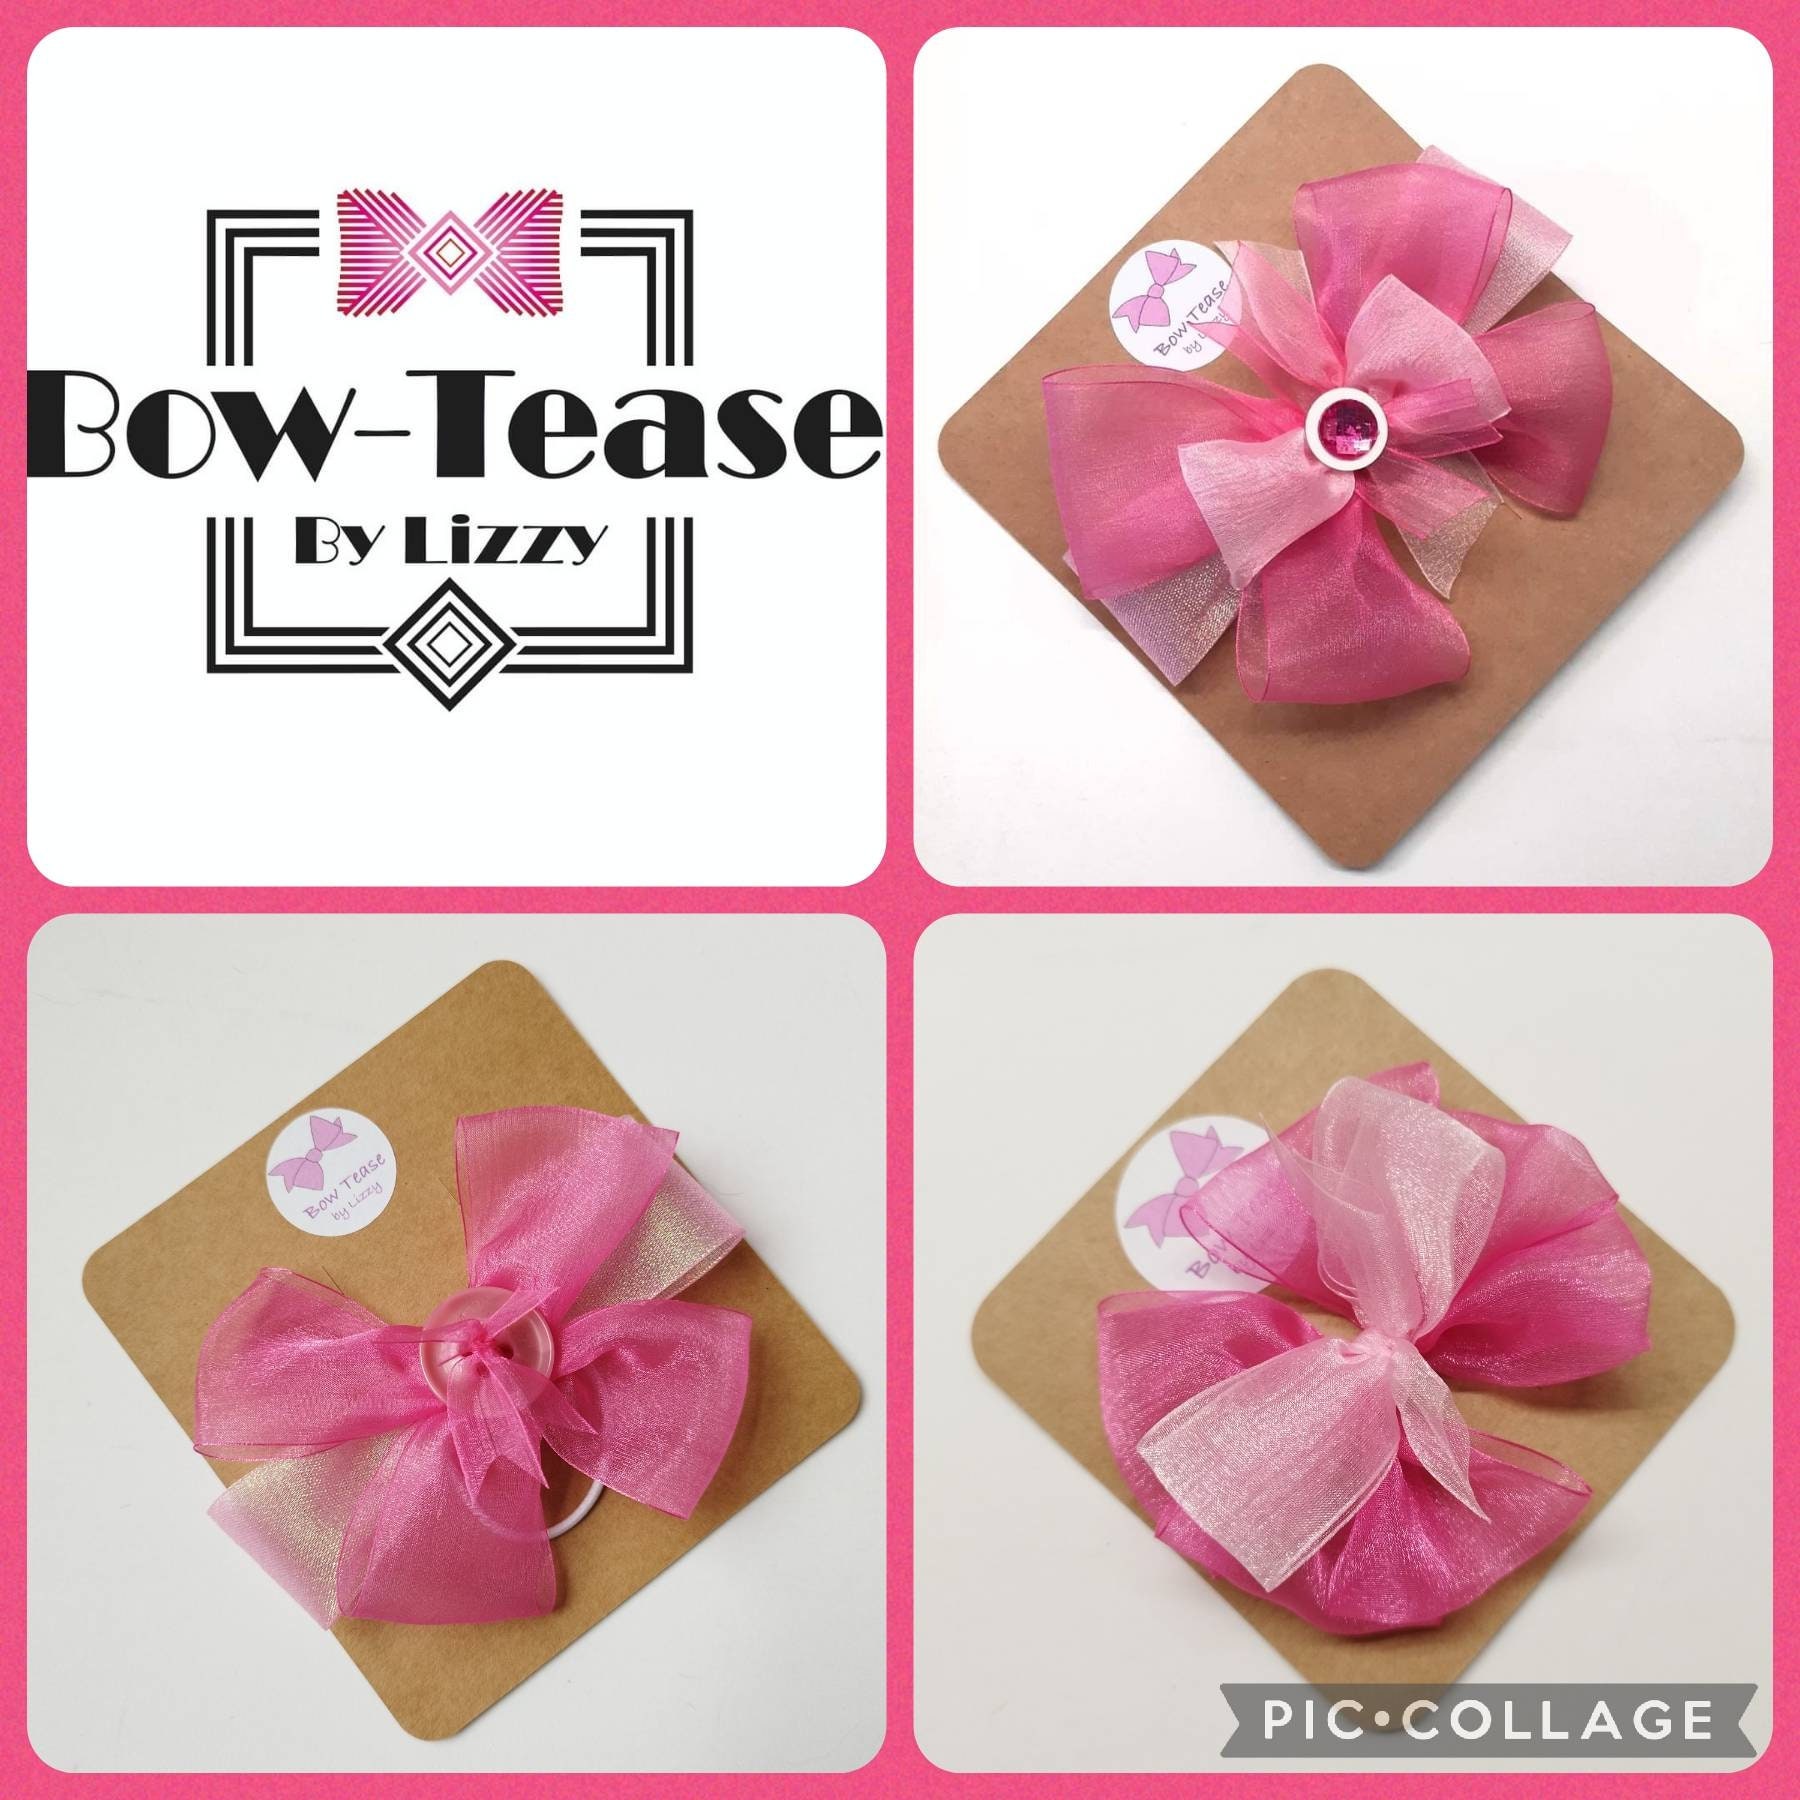 Pack of 5 Baby Pink Large 8.5cm / 25mm Satin Ribbon Ready Made Craft Double  Bows 